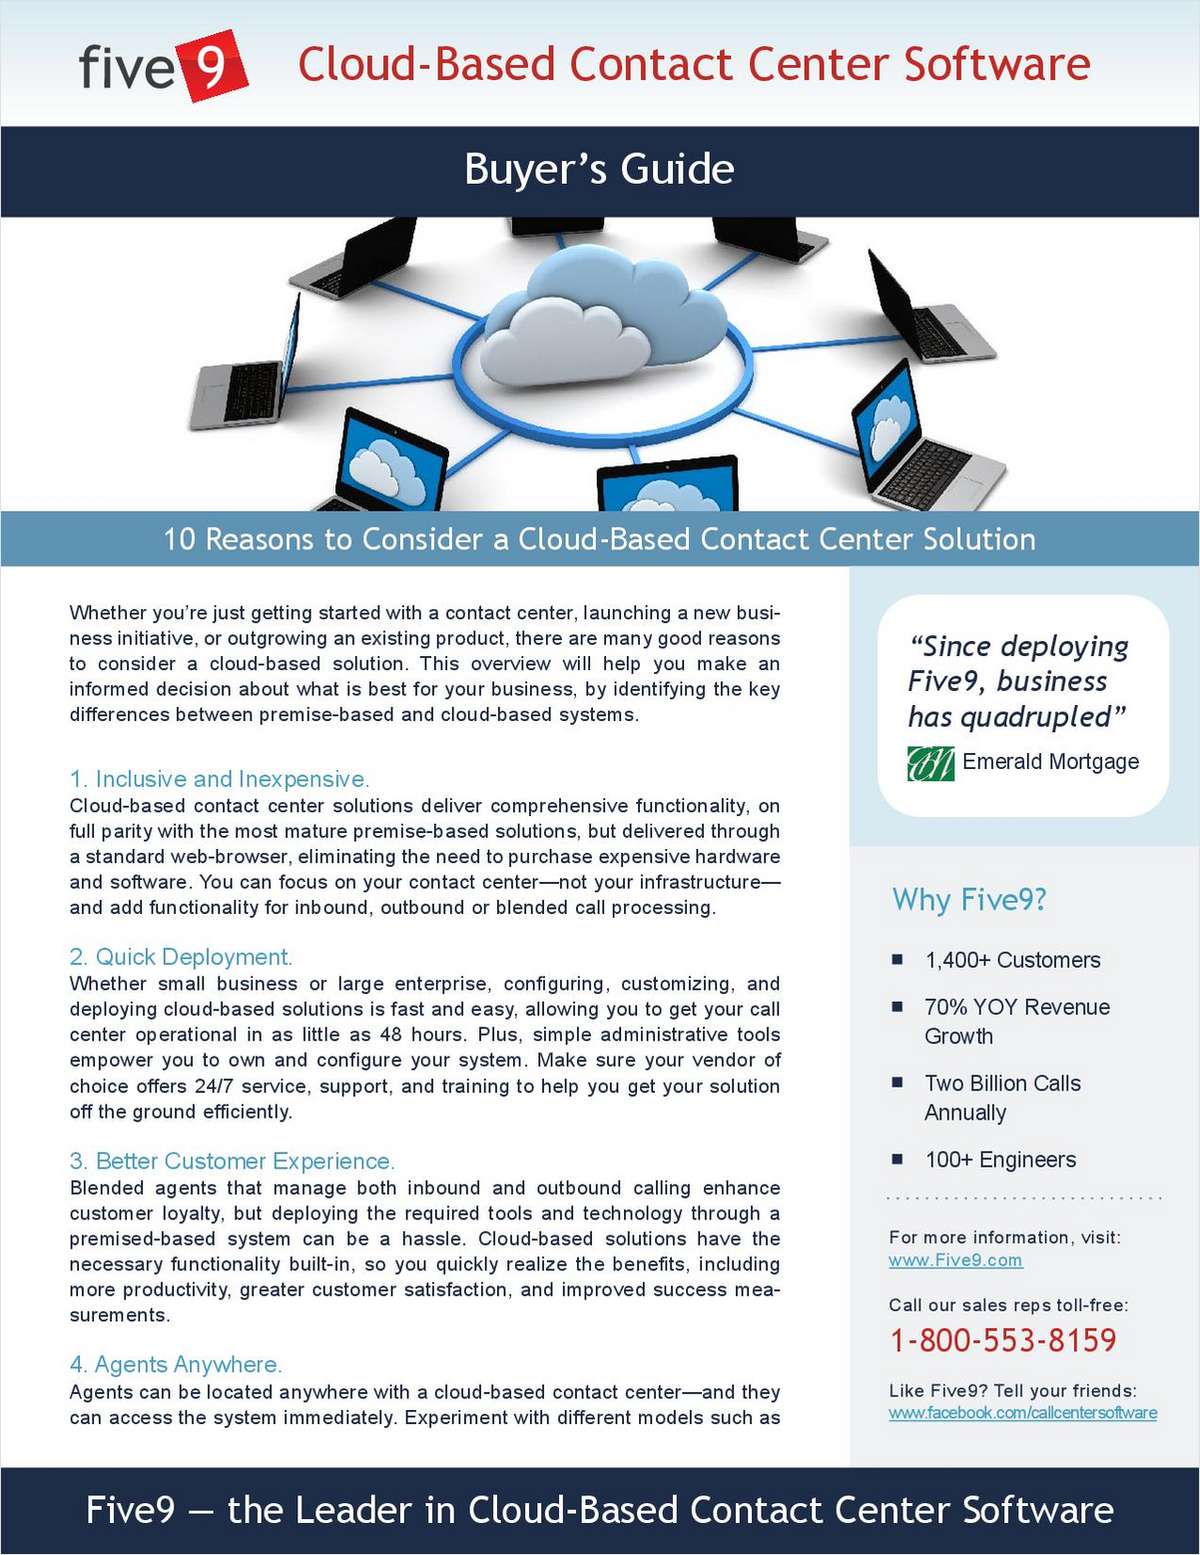 10 Reasons to Consider a Cloud-Based Contact Center Solution